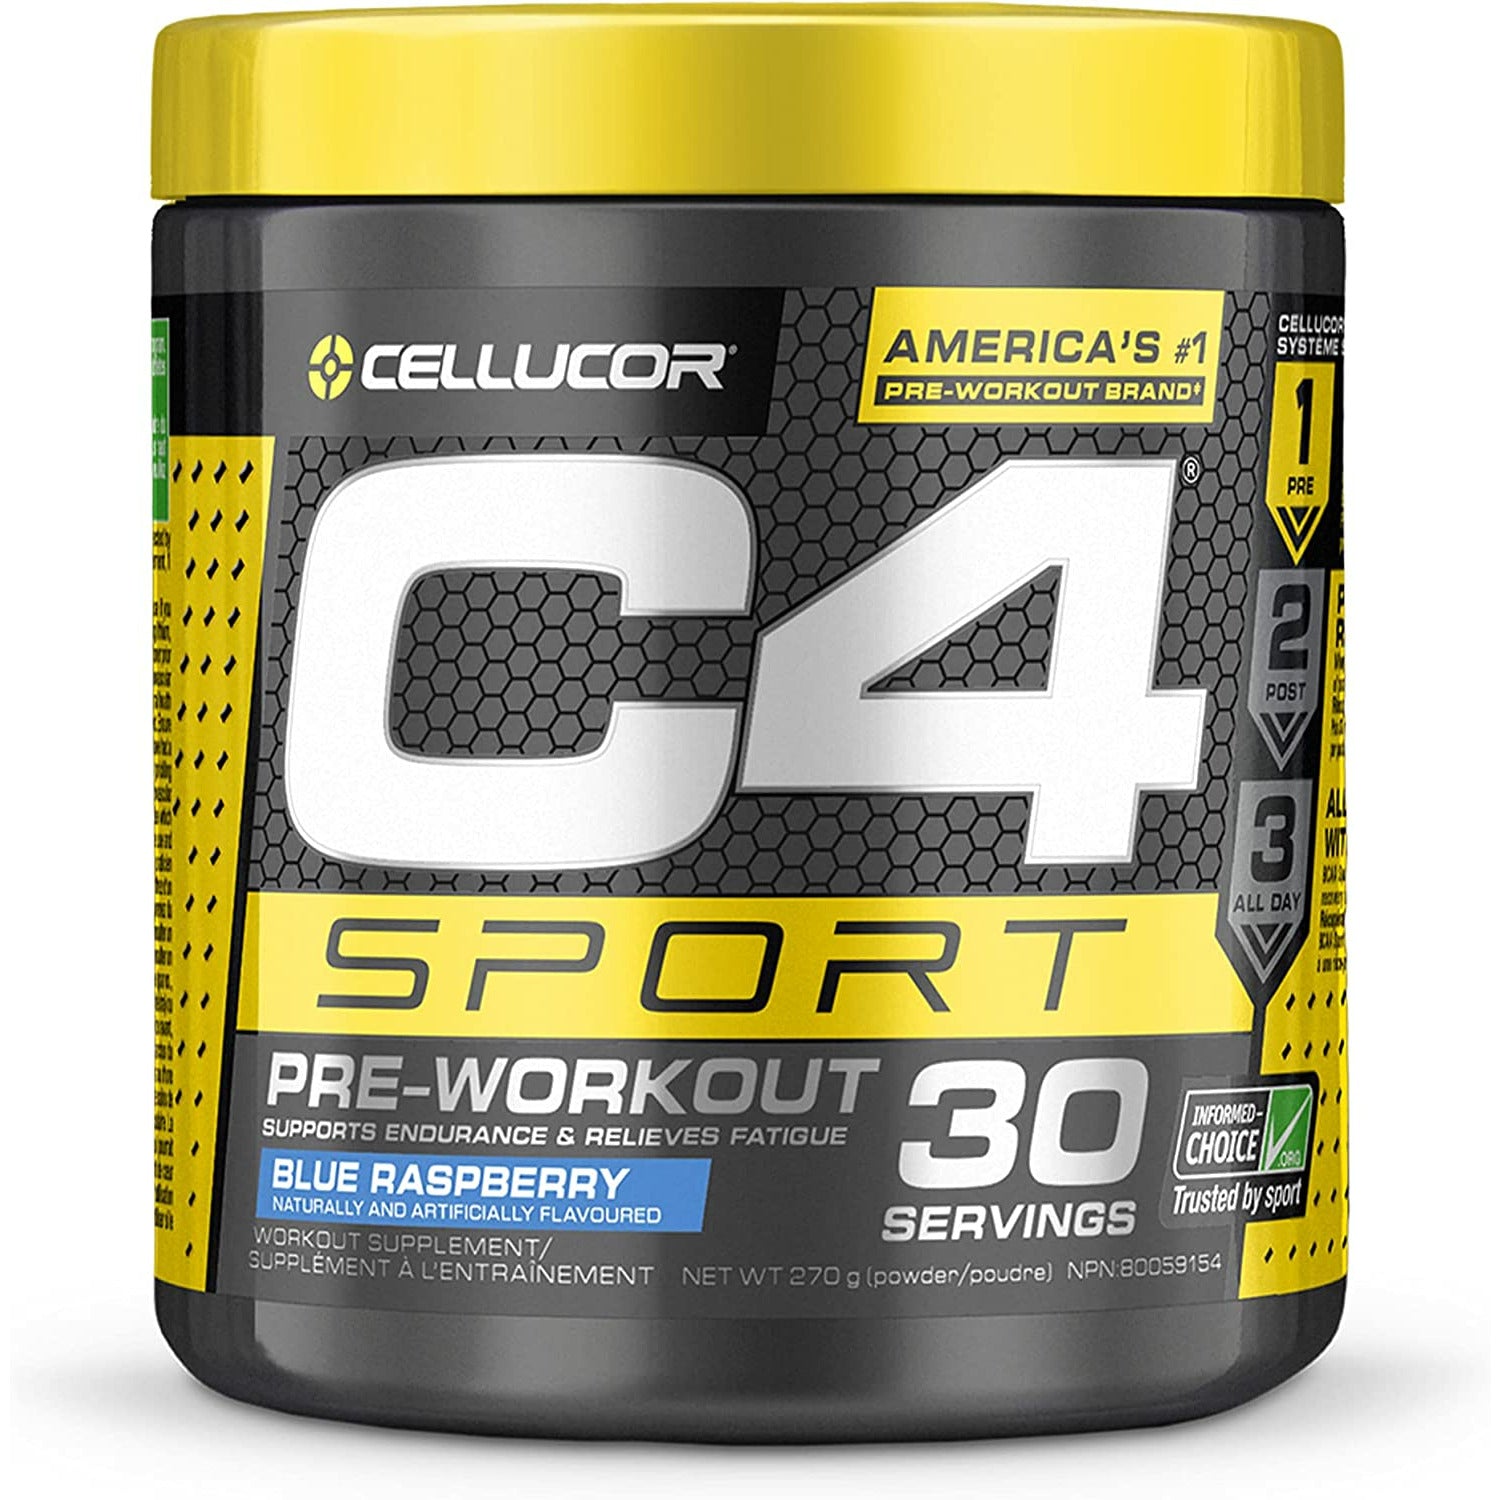 Cellucor NEW C4 SPORT Pre-Workout 30 servings Cellucor Top Nutrition Canada